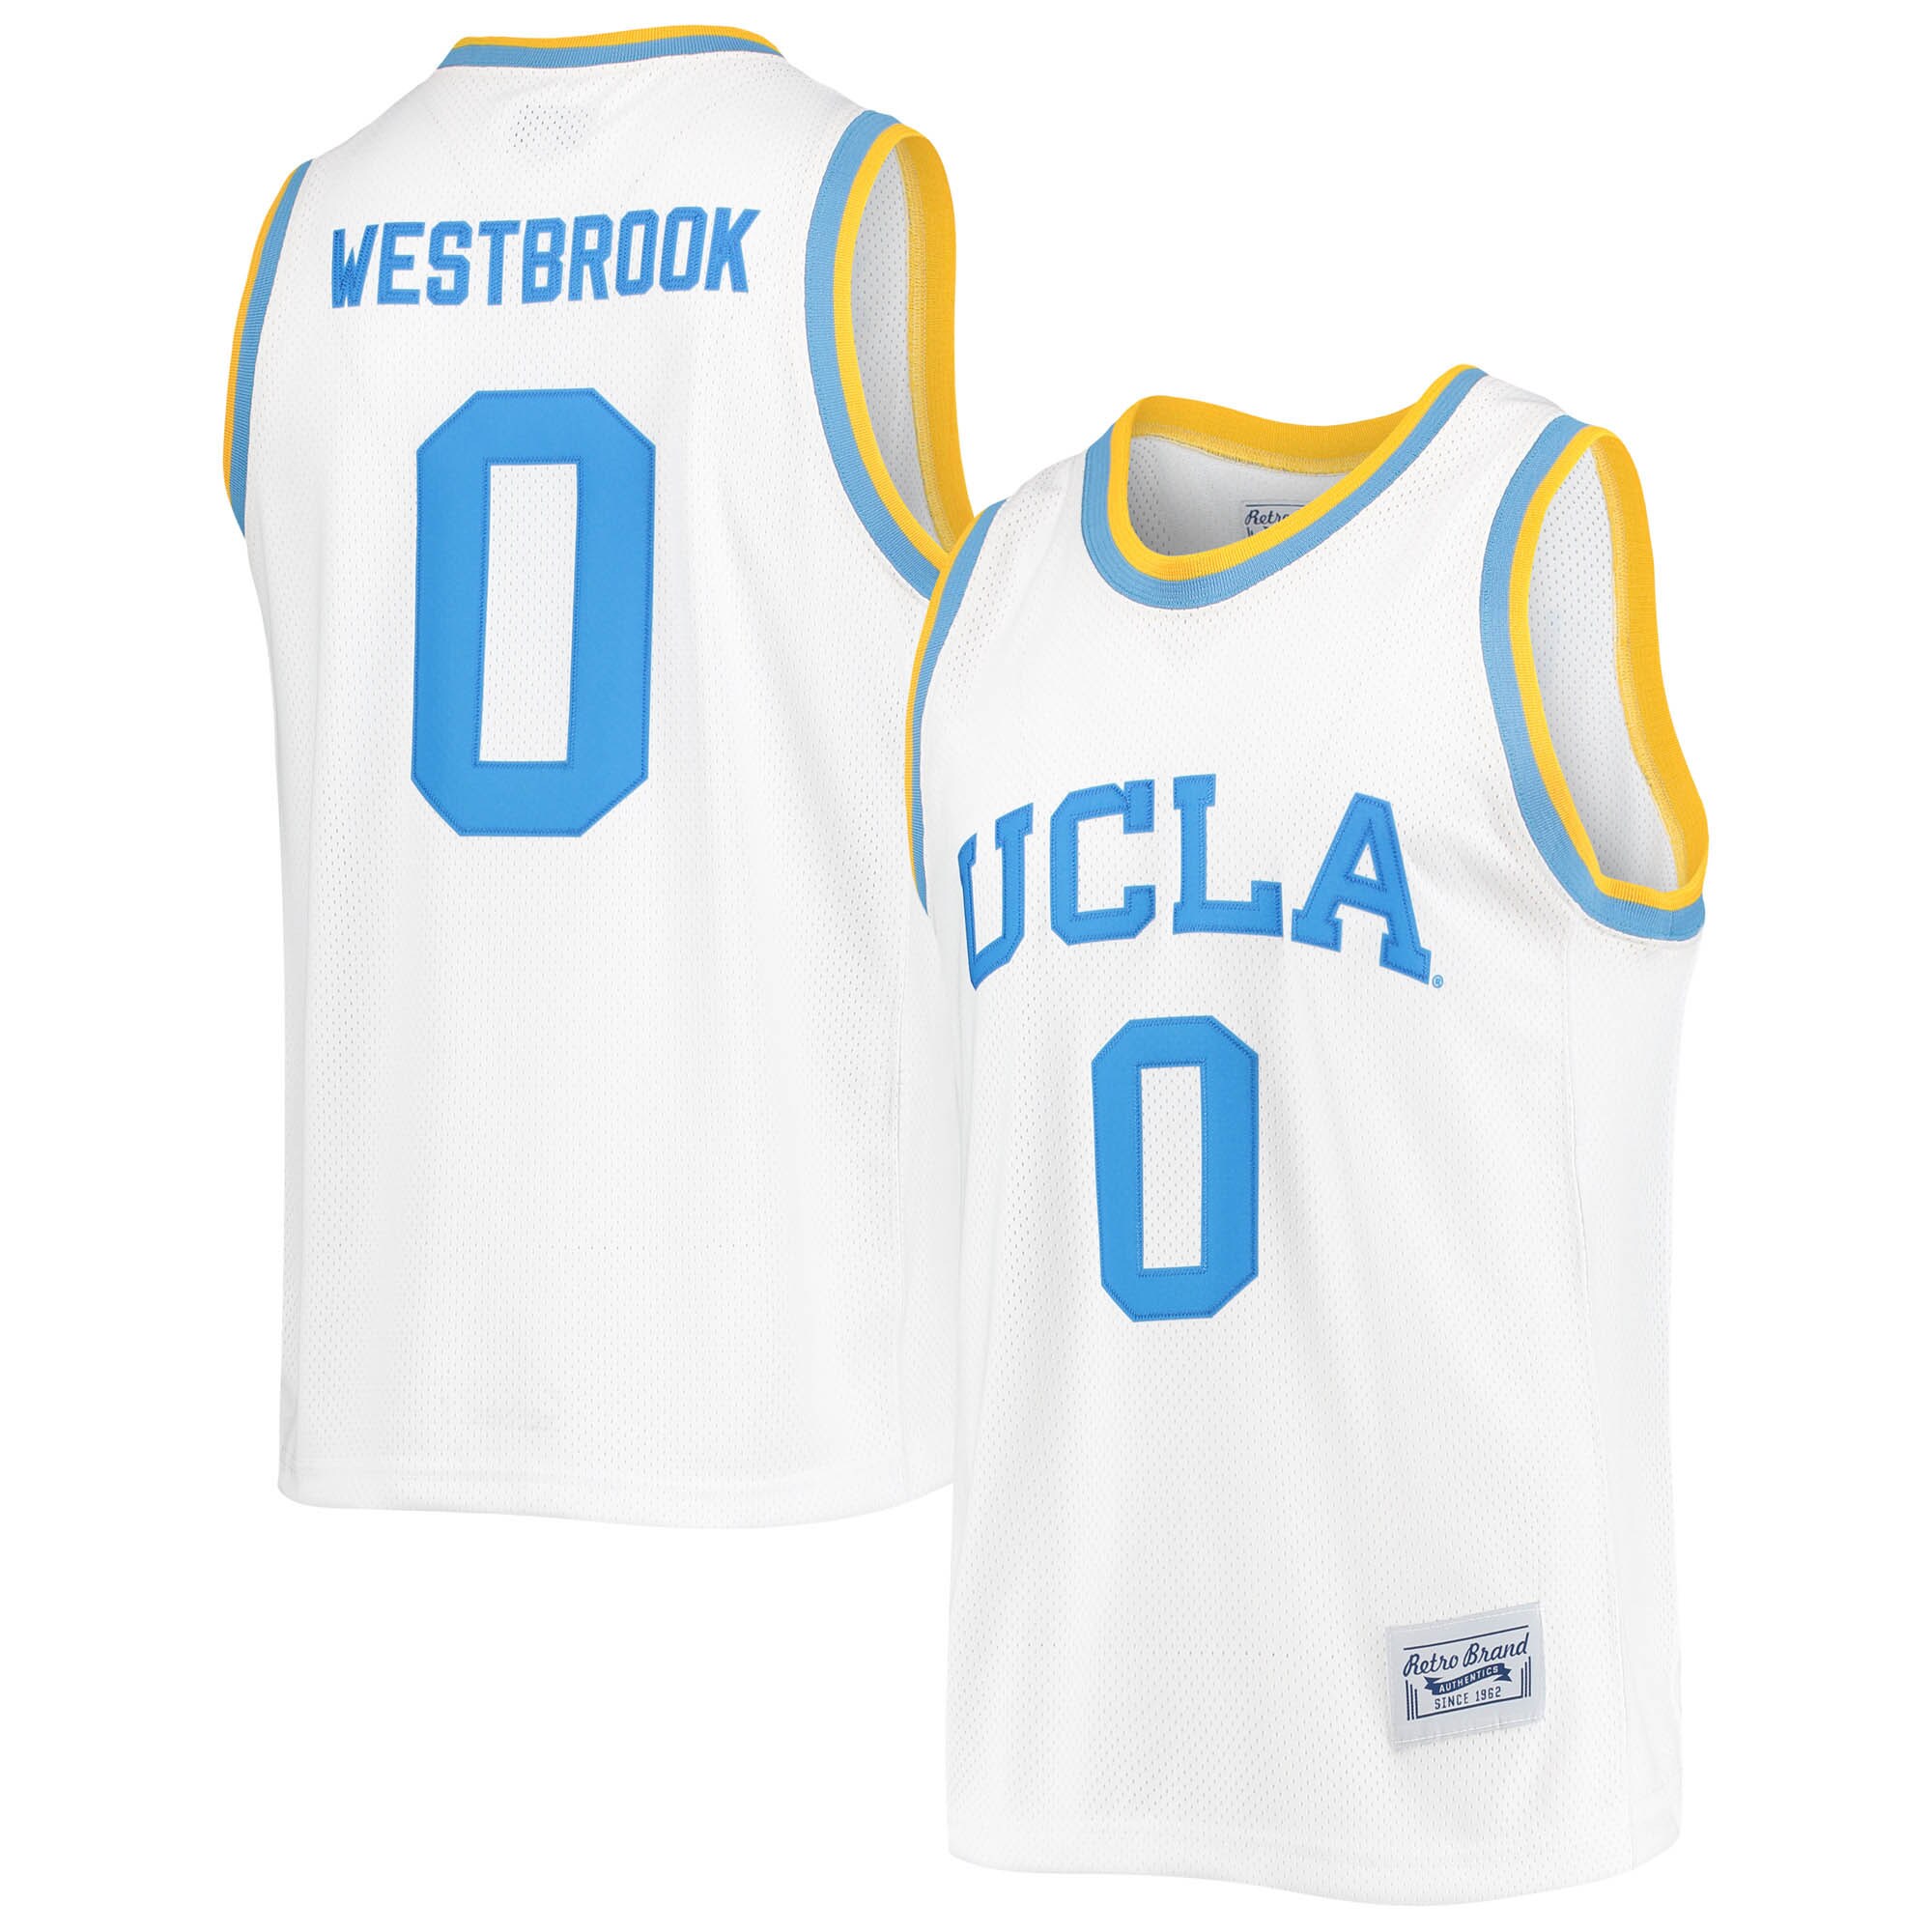 Russell Westbrook Ucla Bruins Original Retro Brand Commemorative Classic Basketball Jersey - White For Youth Women Men